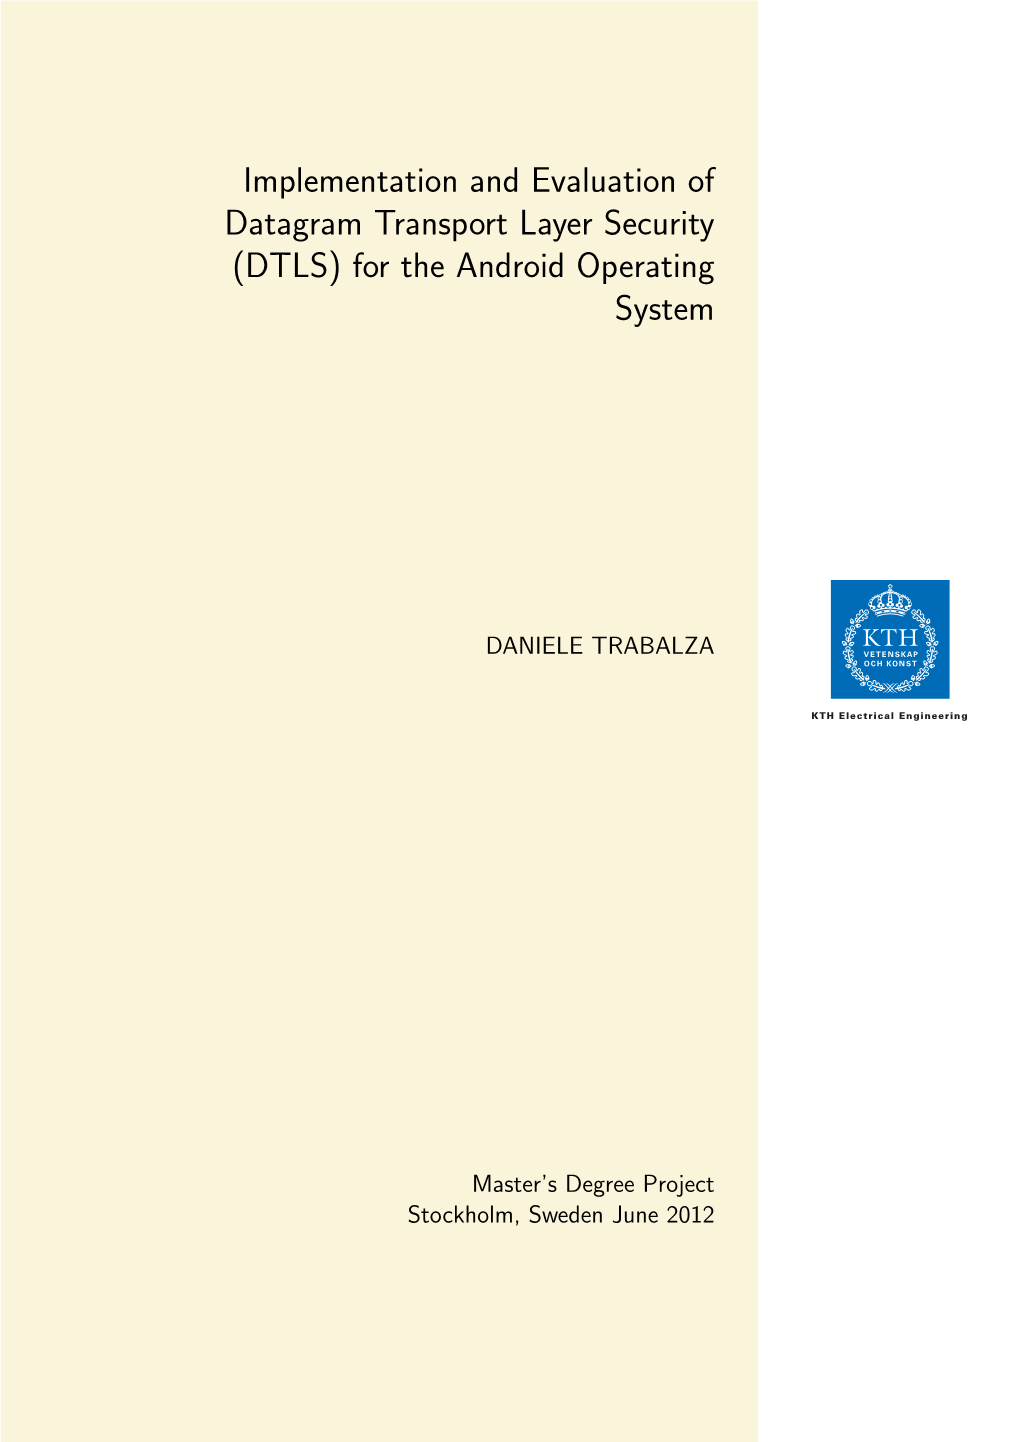 Implementation and Evaluation of Datagram Transport Layer Security (DTLS) for the Android Operating System